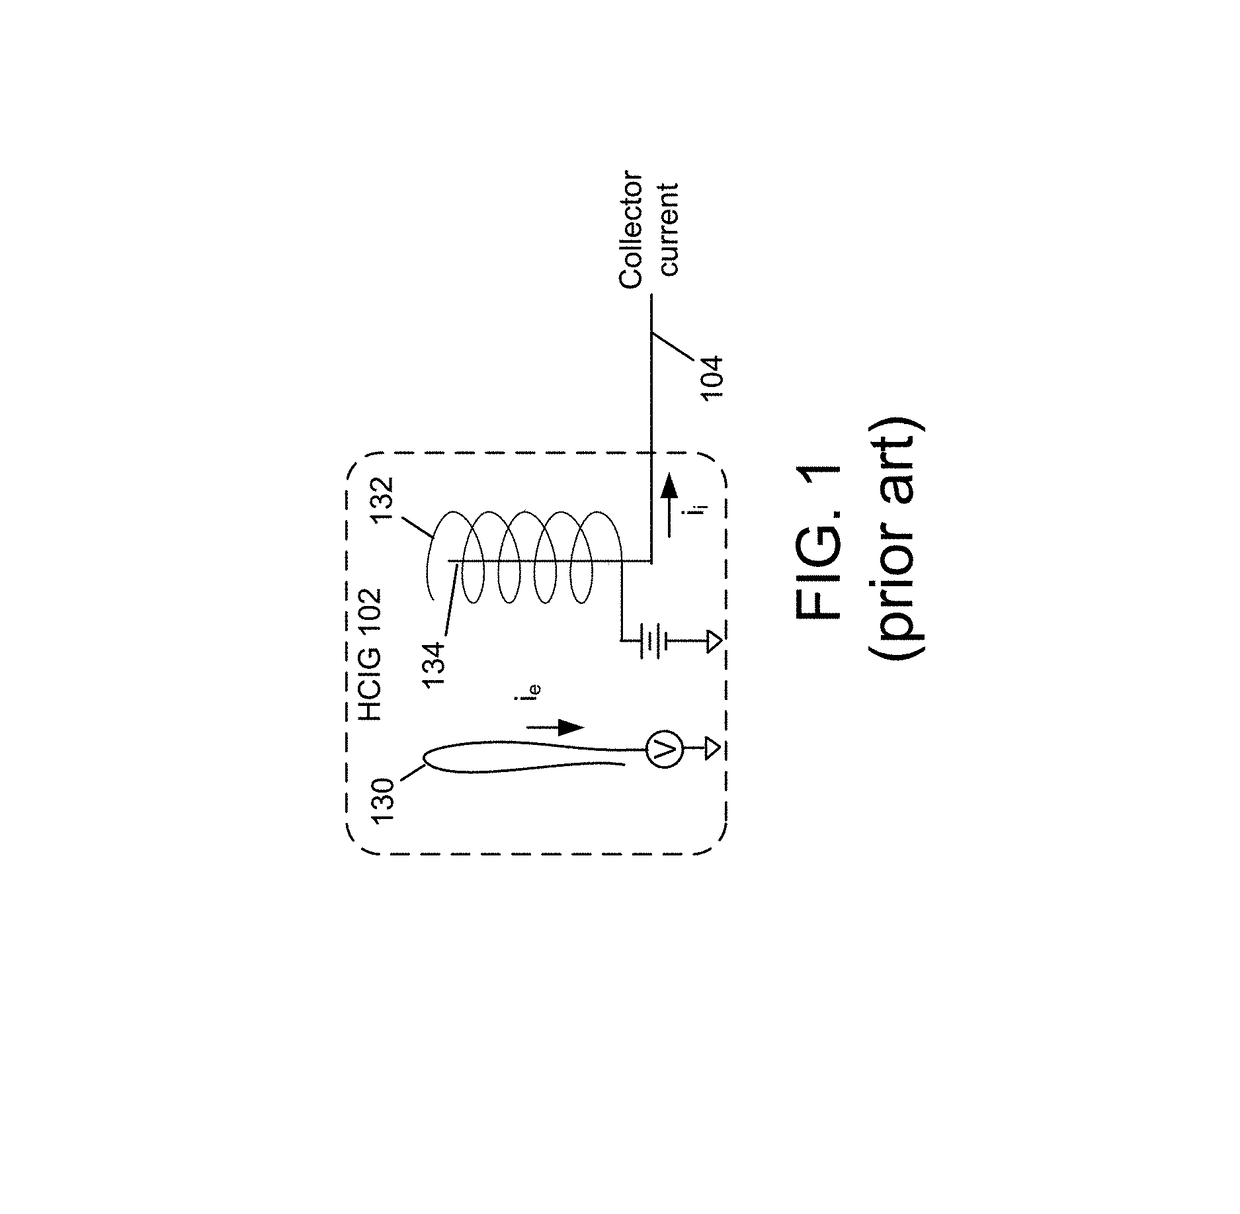 Trans-impedance amplifier with increased dynamic range